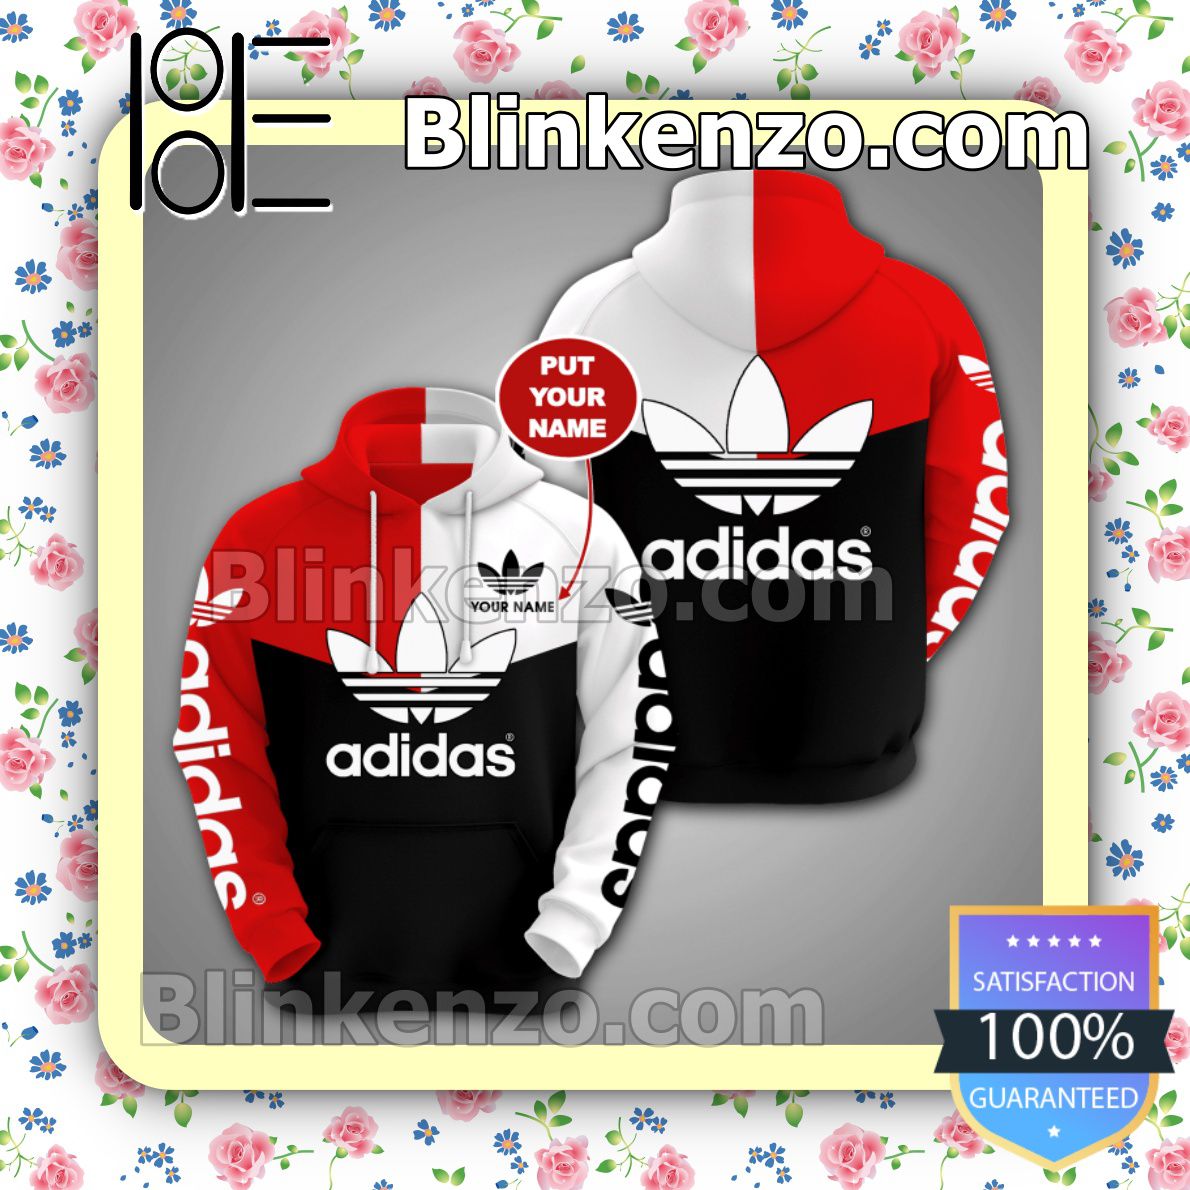 Mediaan Verder actrice Personalized Adidas Mix Color Red White And Black Fleece Hoodie, Pants -  Blinkenzo